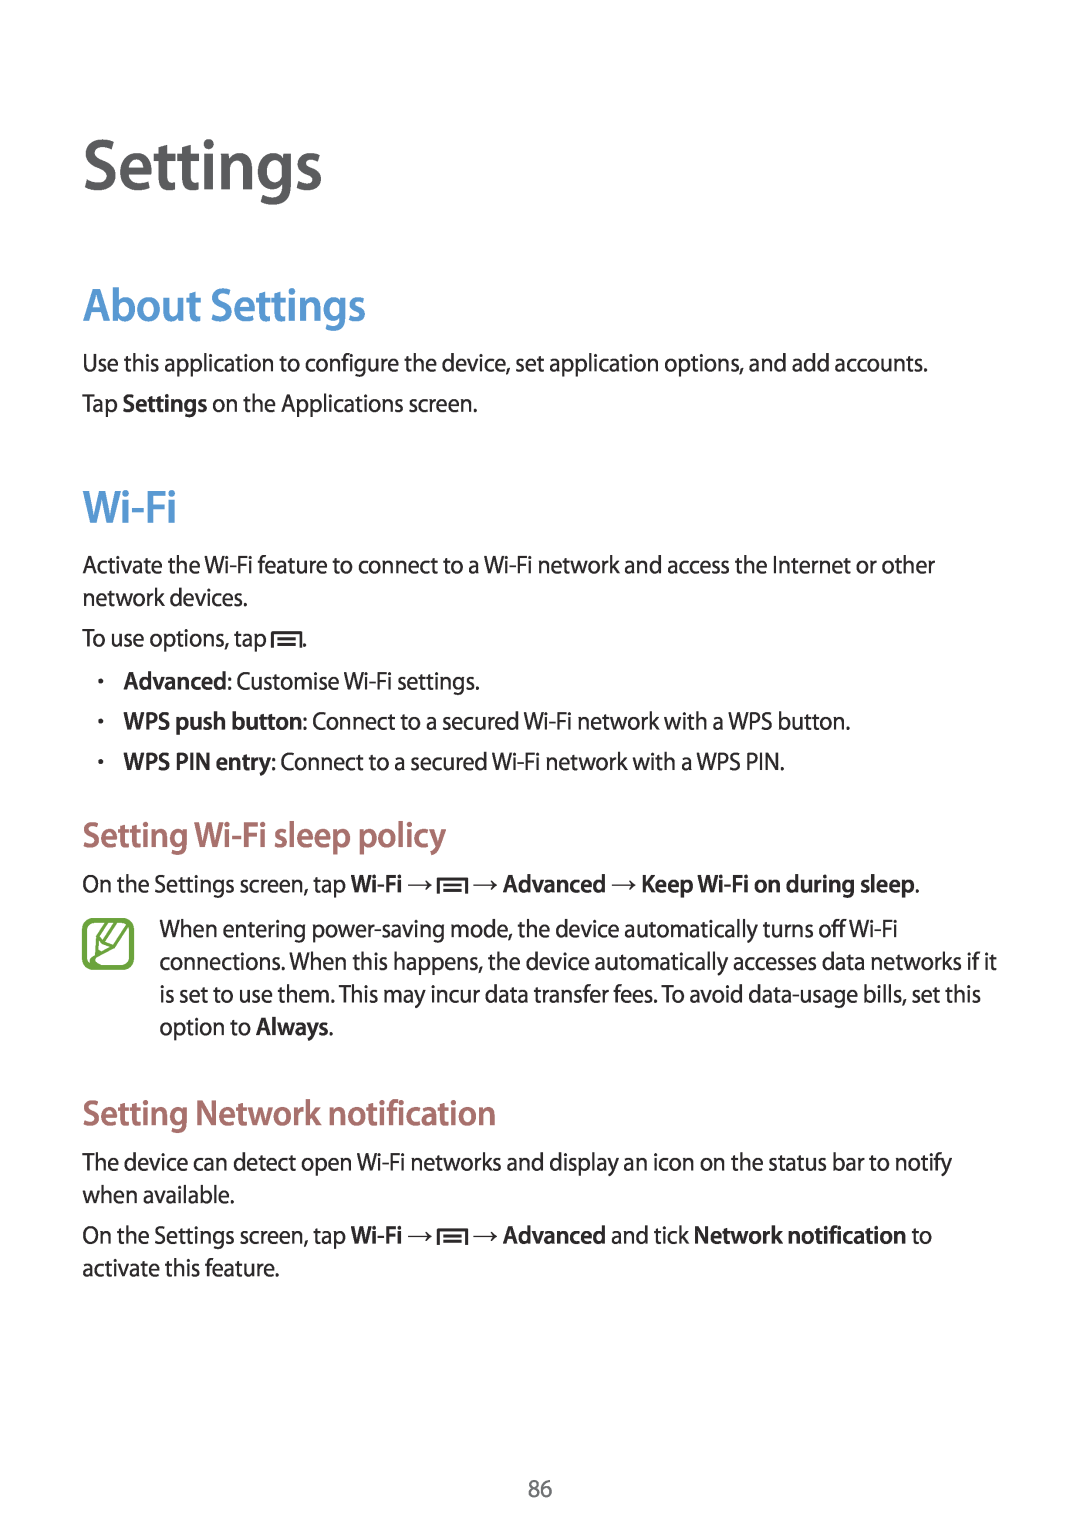 Samsung GT-S6810MBNWIN, GT-S6810PWNTUR About Settings, Setting Wi-Fi sleep policy, Setting Network notification 